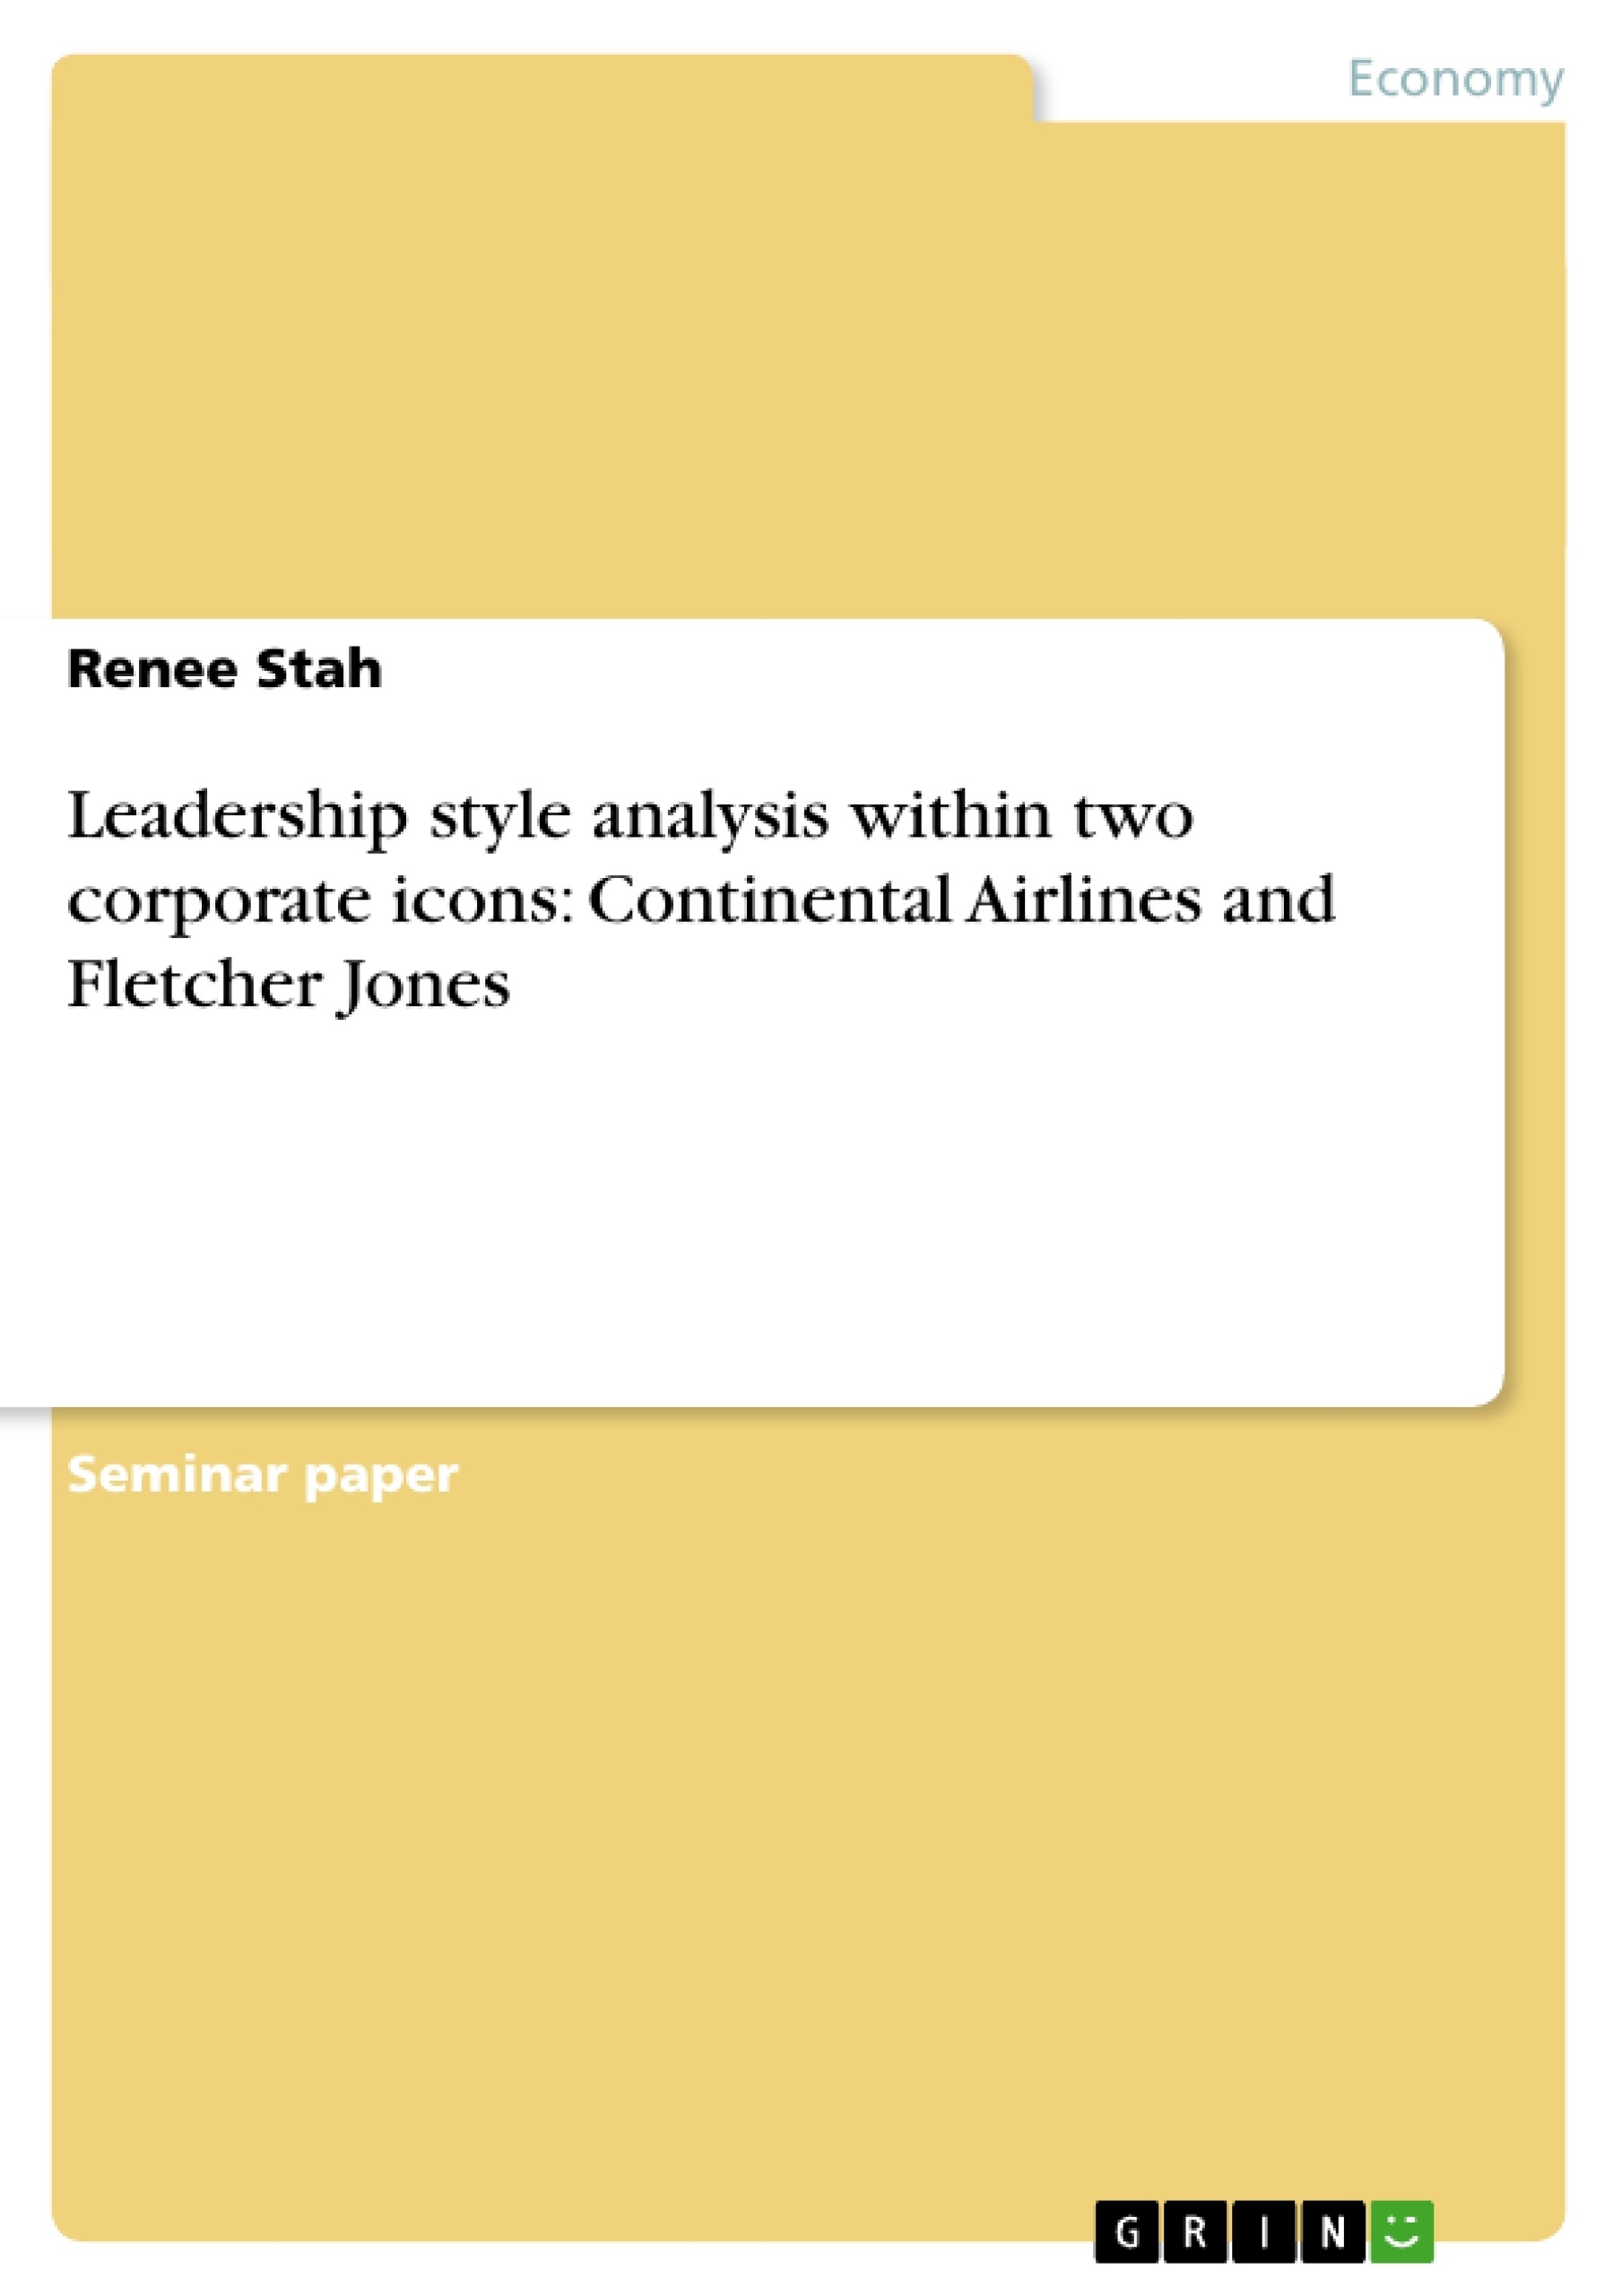 Title: Leadership style analysis within two corporate icons: Continental Airlines and Fletcher Jones